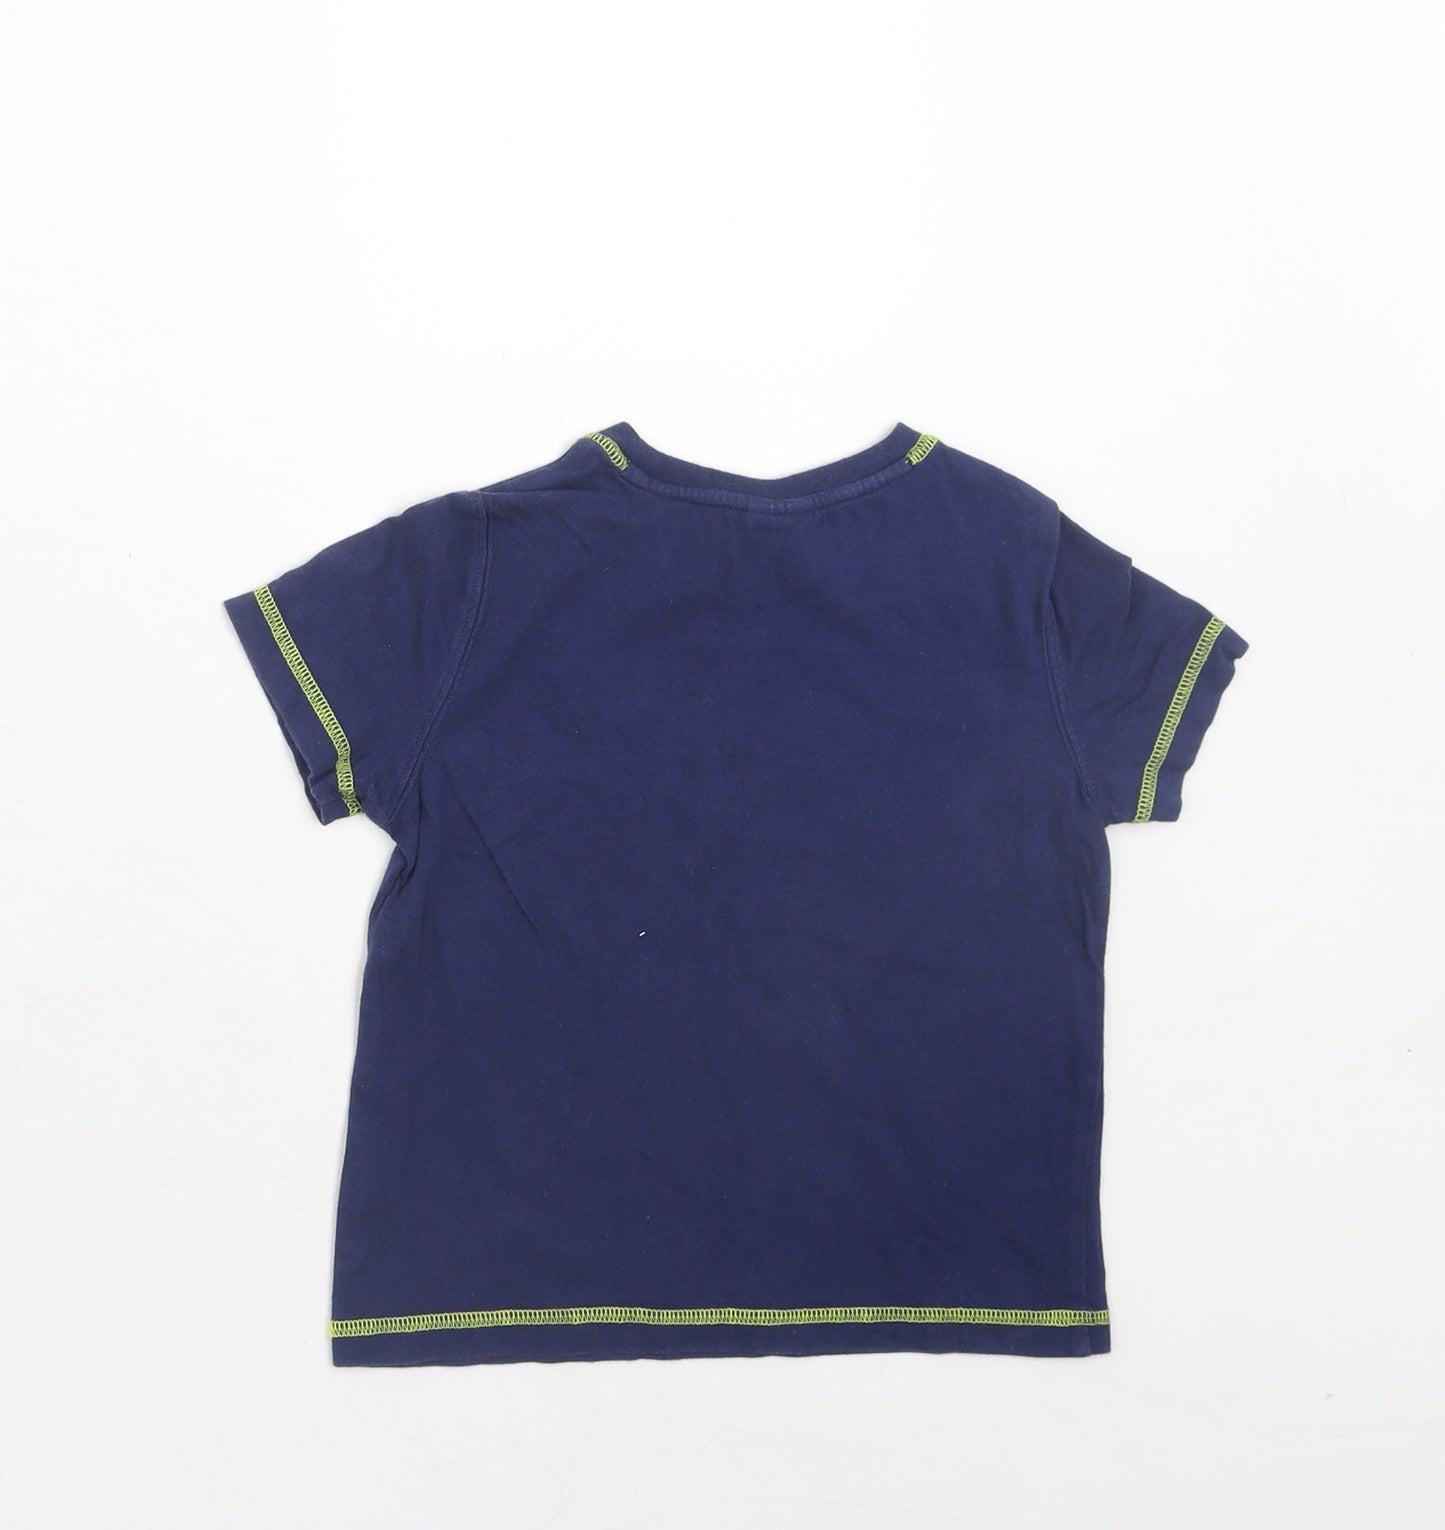 Disney Toy Story Boys Blue Cotton Basic T-Shirt Size 2-3 Years Round Neck Pullover - Toy Story